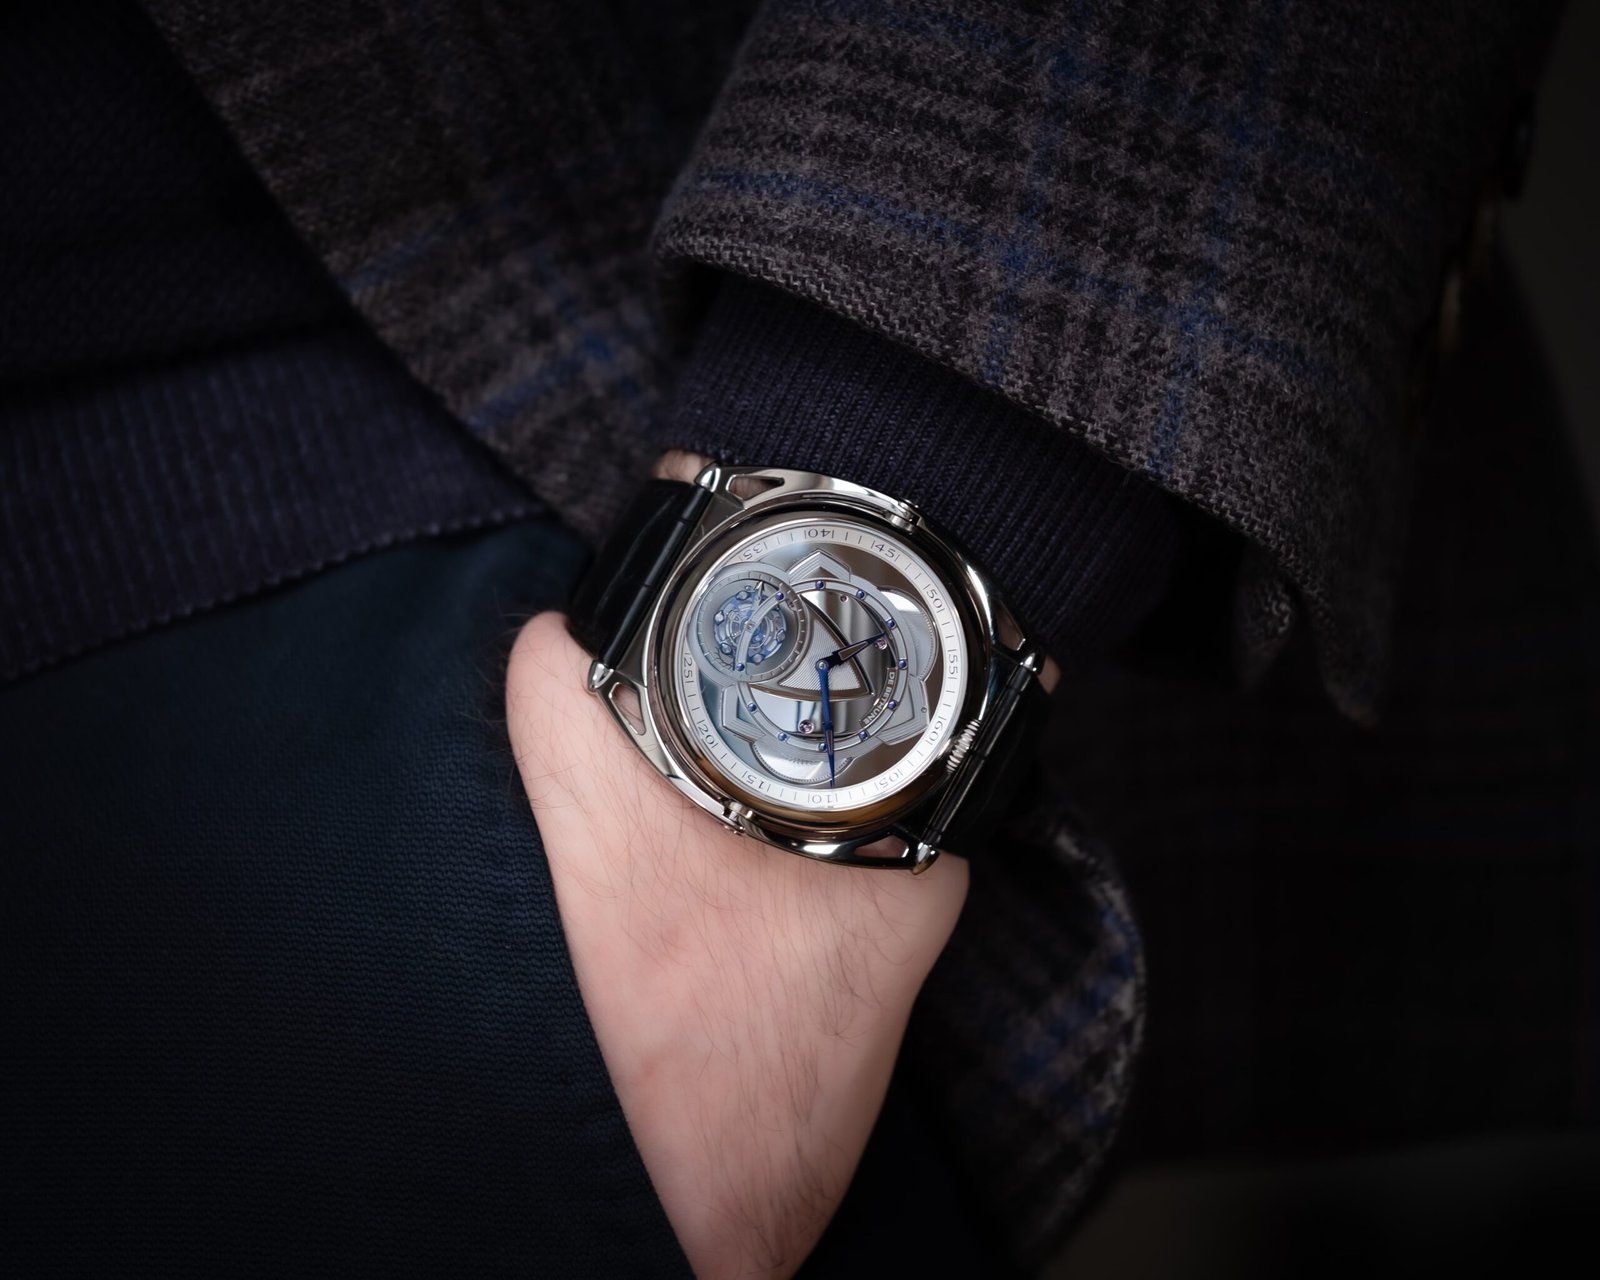 FEATURED: DE BETHUNE - DB Kind of Two Tourbillon